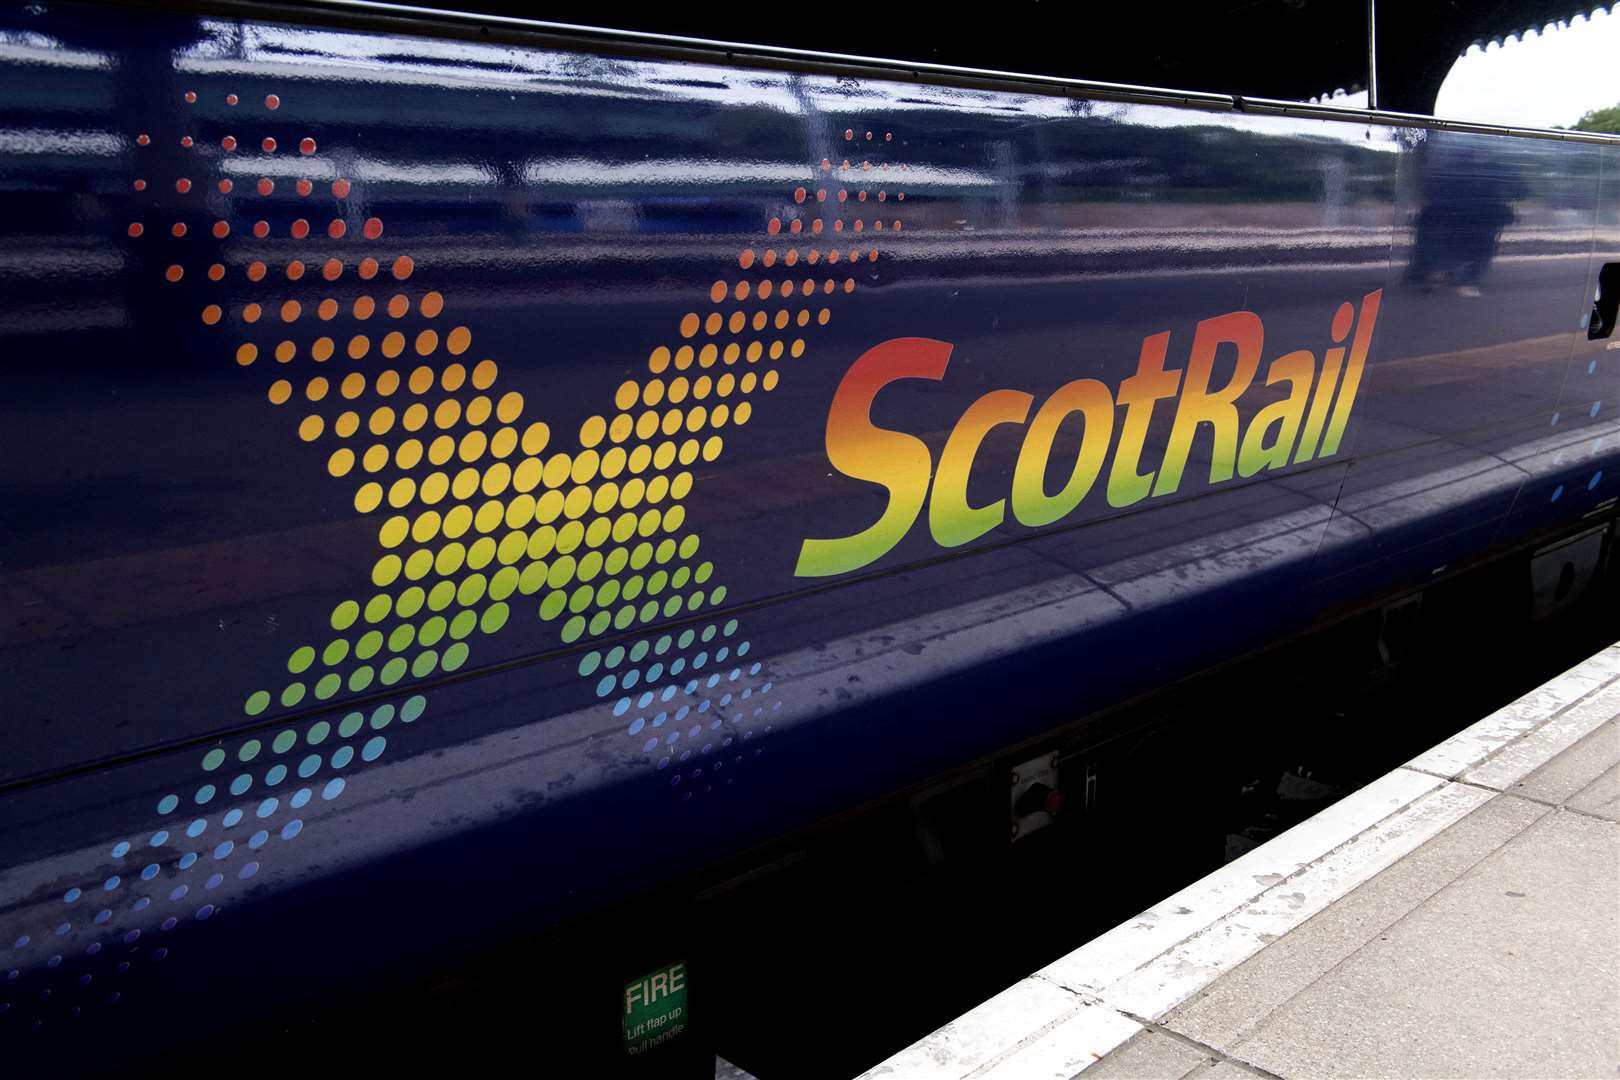 A Highland train operator is up for a national 'Pride' award.